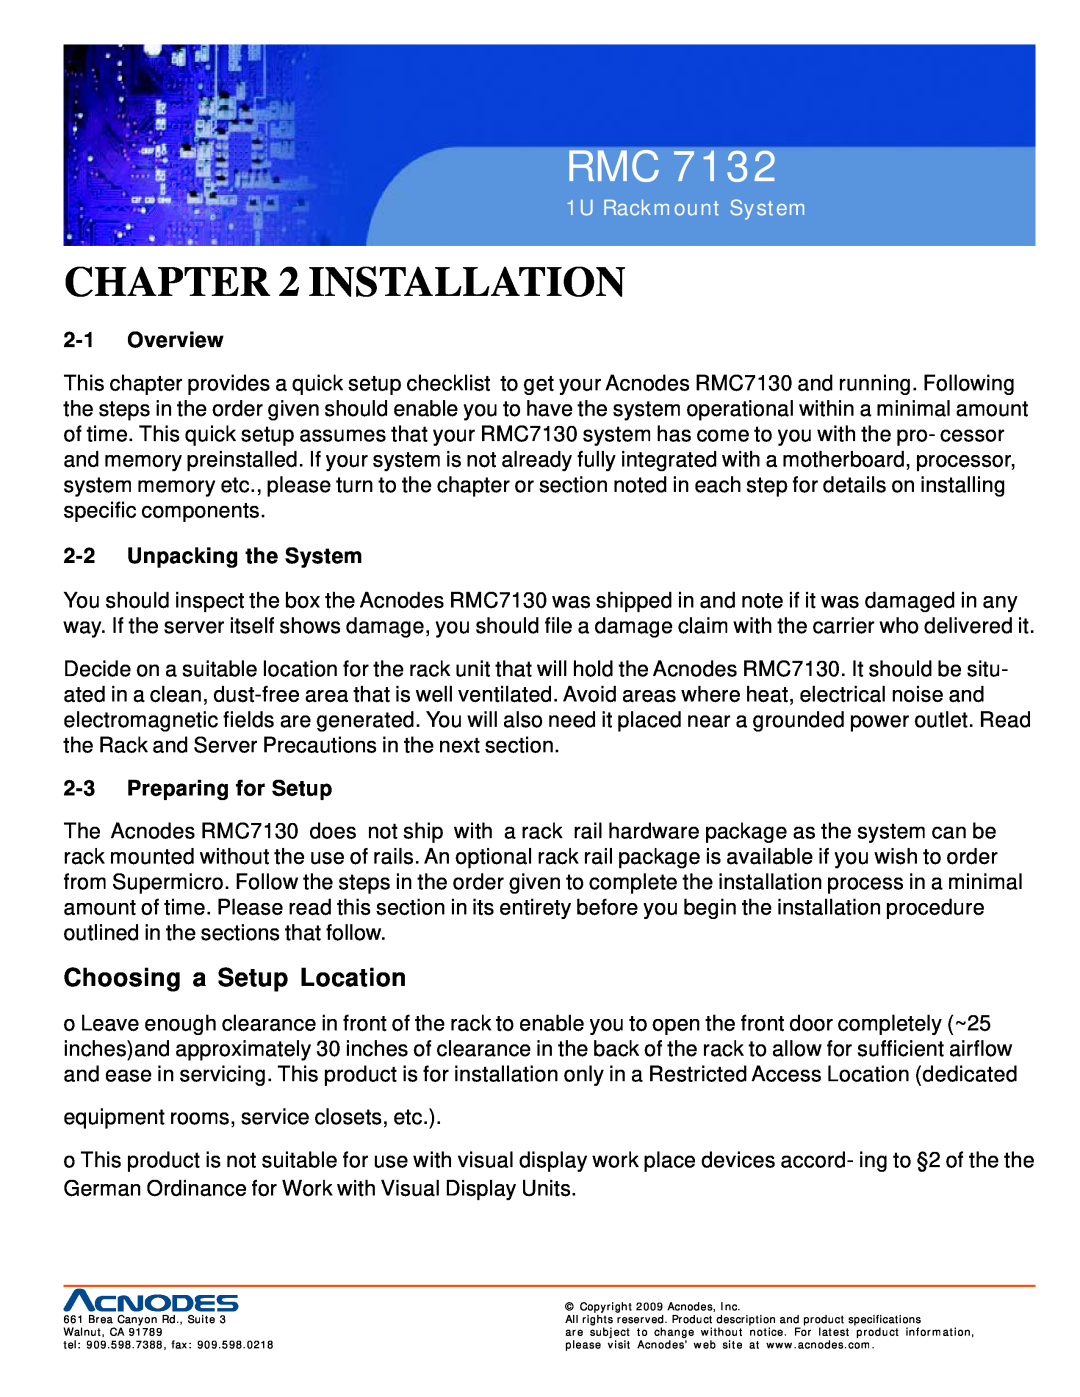 Acnodes RMC 7132 user manual Installation, Choosing a Setup Location, Overview, Unpacking the System, Preparing for Setup 